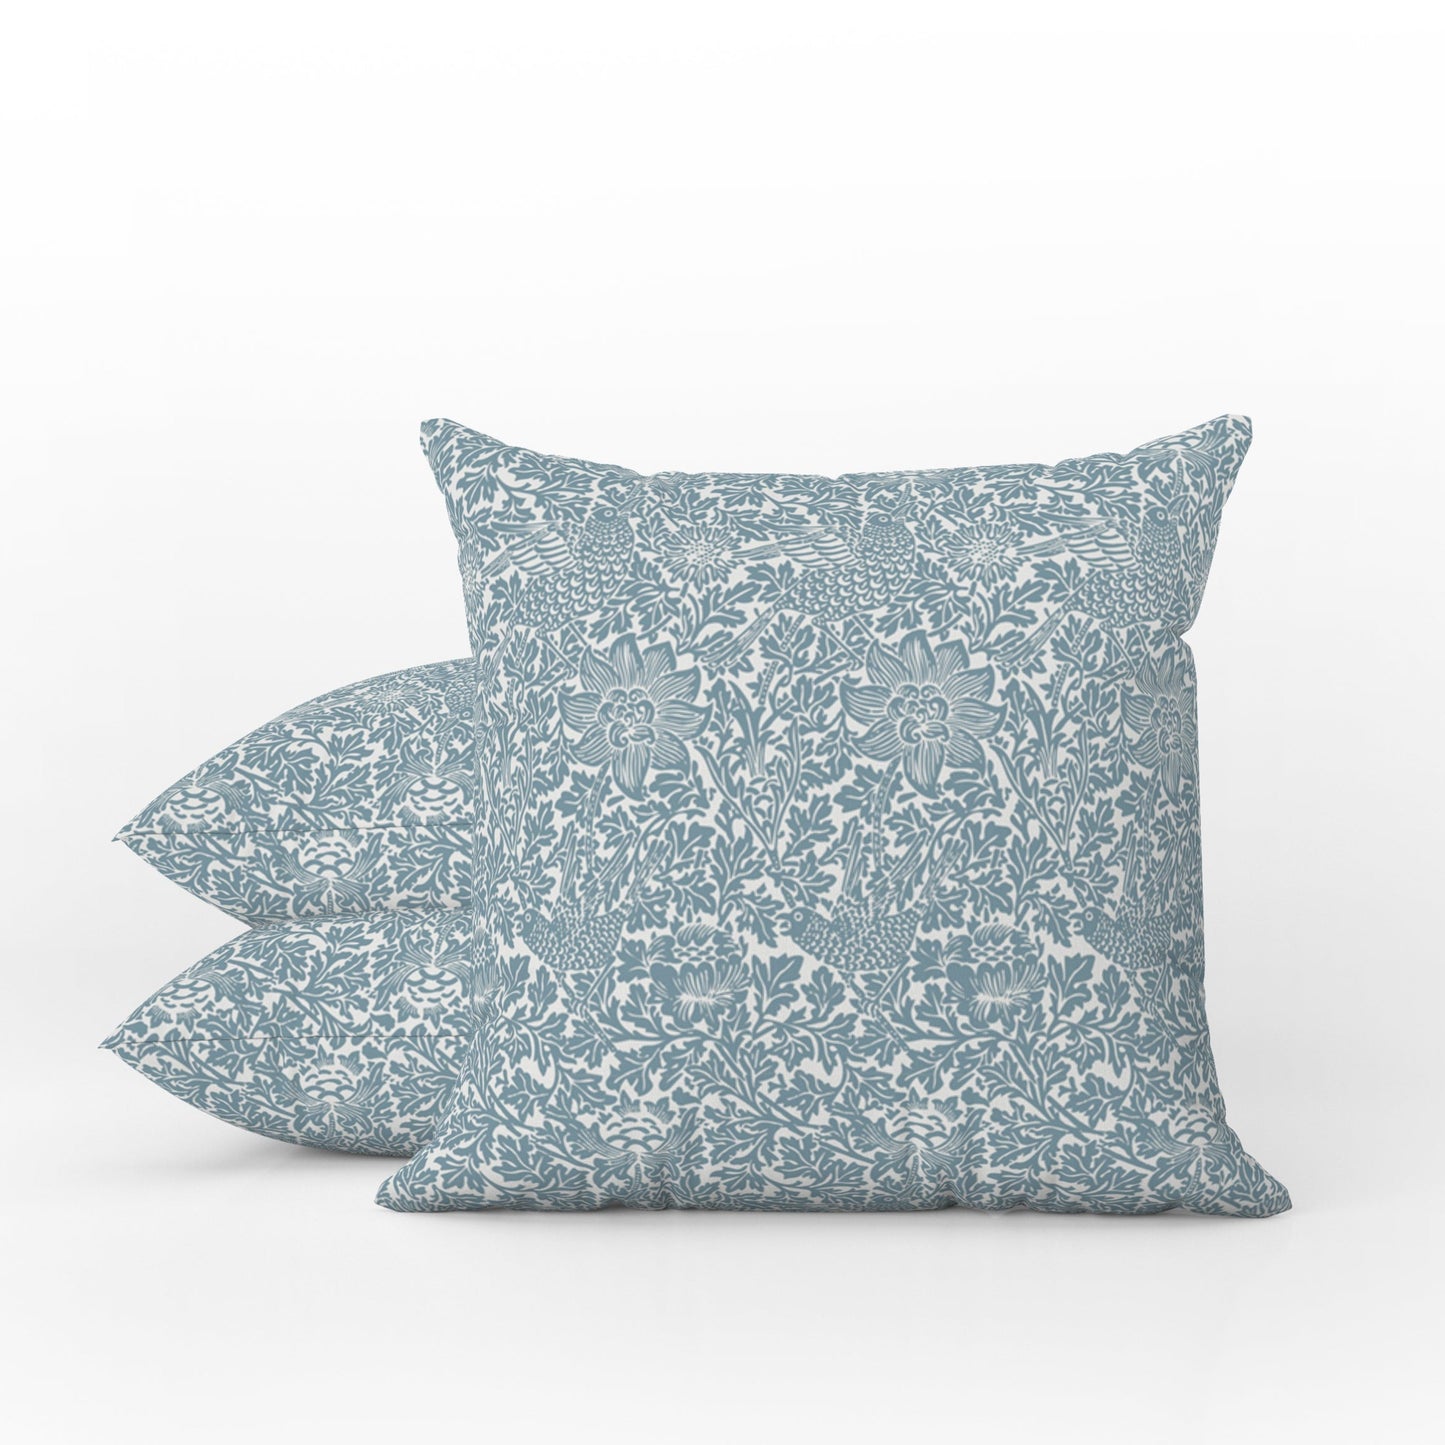 William Morris Outdoor Pillows Bird & Anemone French Blue